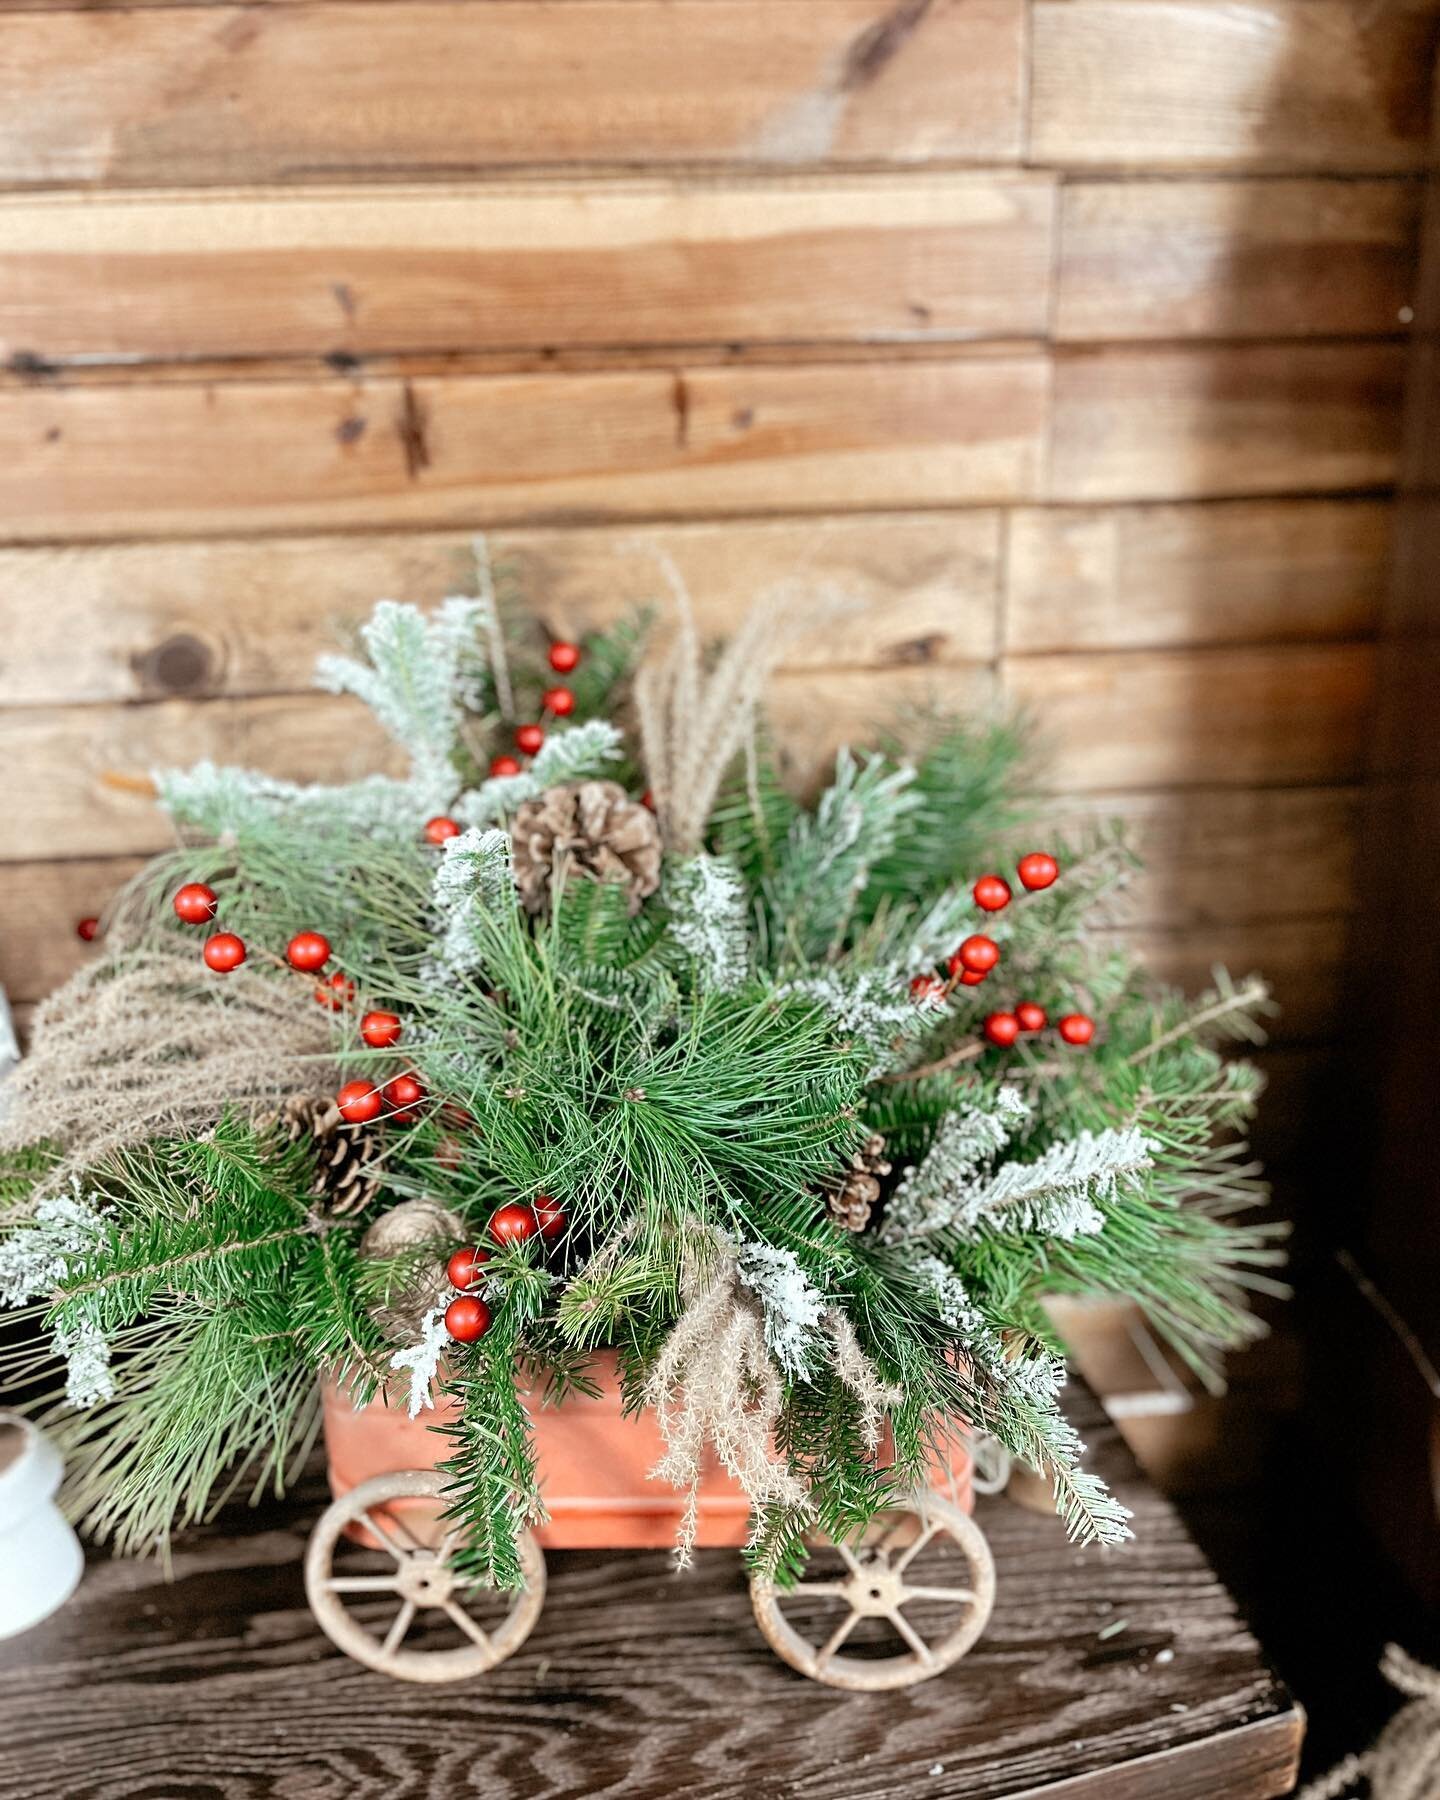 Every Christmas dinner needs a fresh arrangement for the center of the table!  We have lots of great options still or you can bring in your own container for us to fill🎄